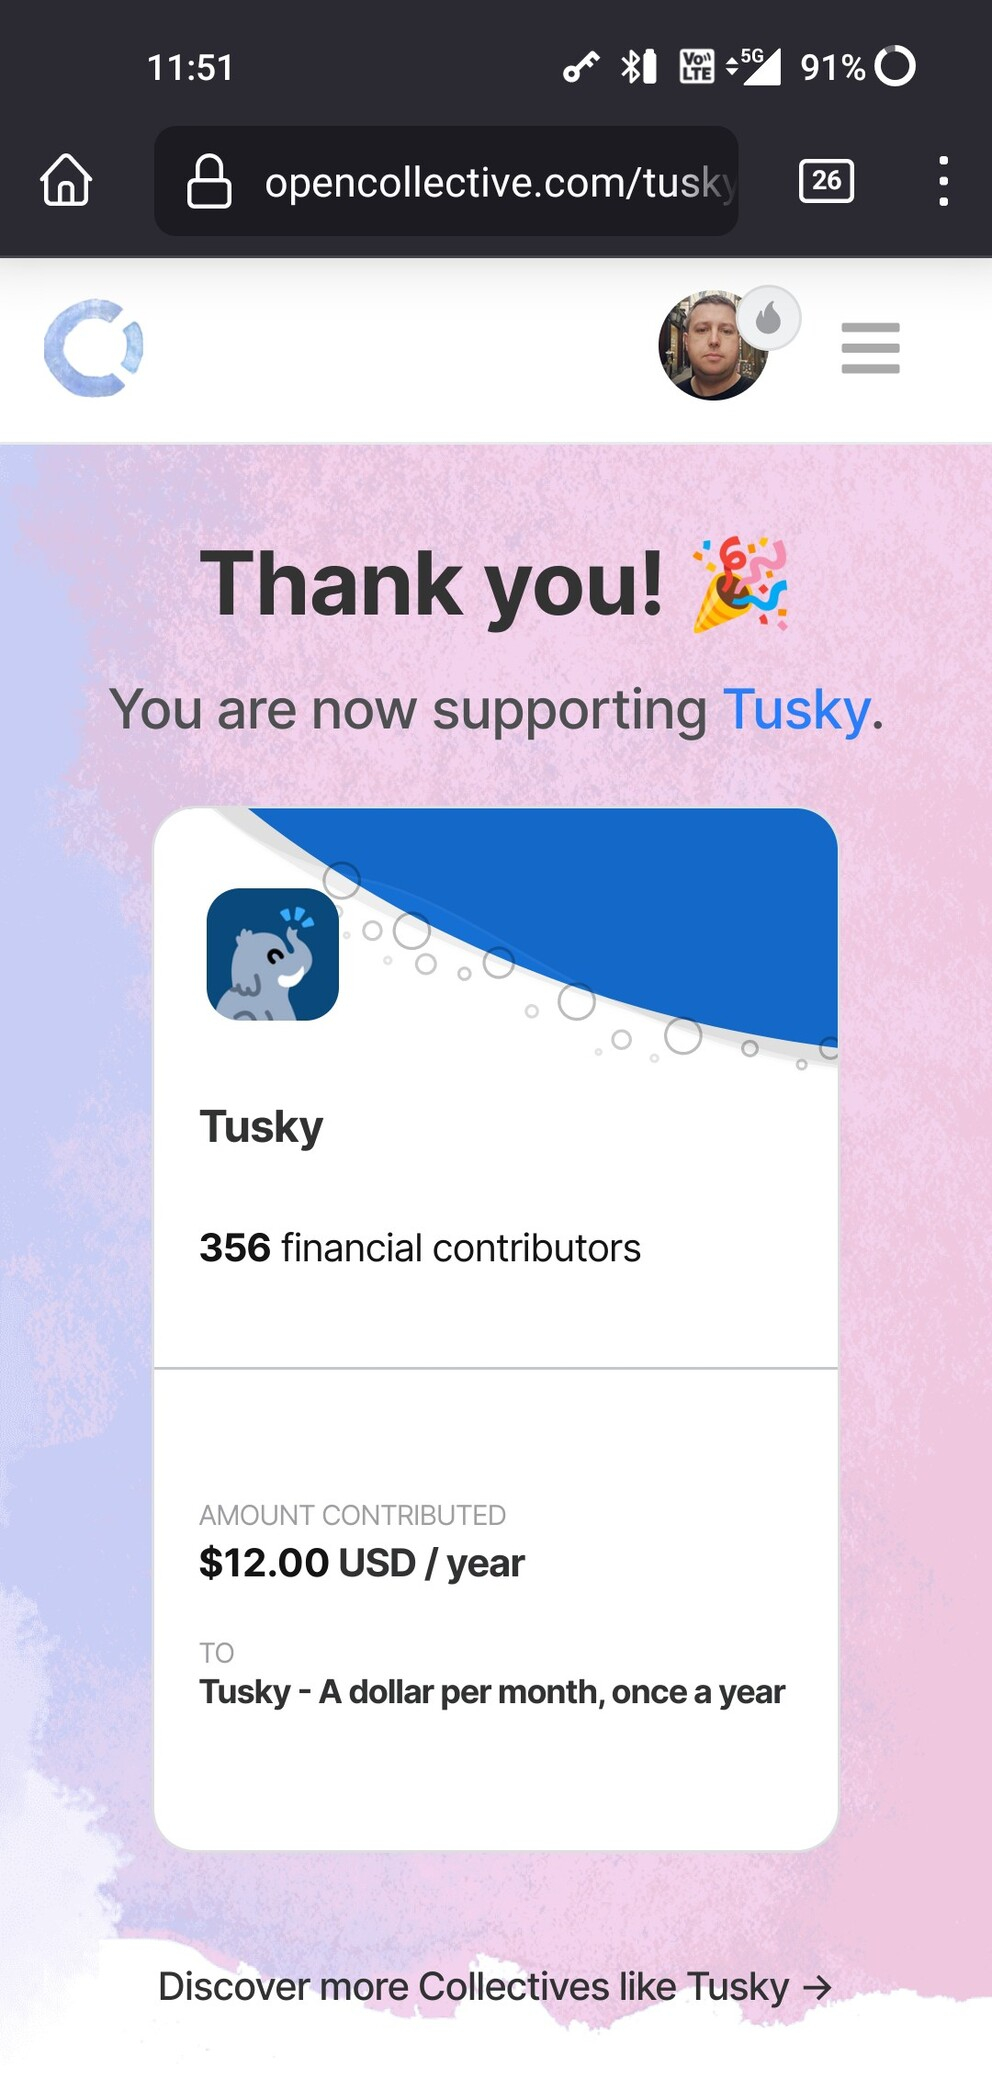 Screenshot of Open Collective "thank you" page showing a $12 annual support payment towards Tusky.